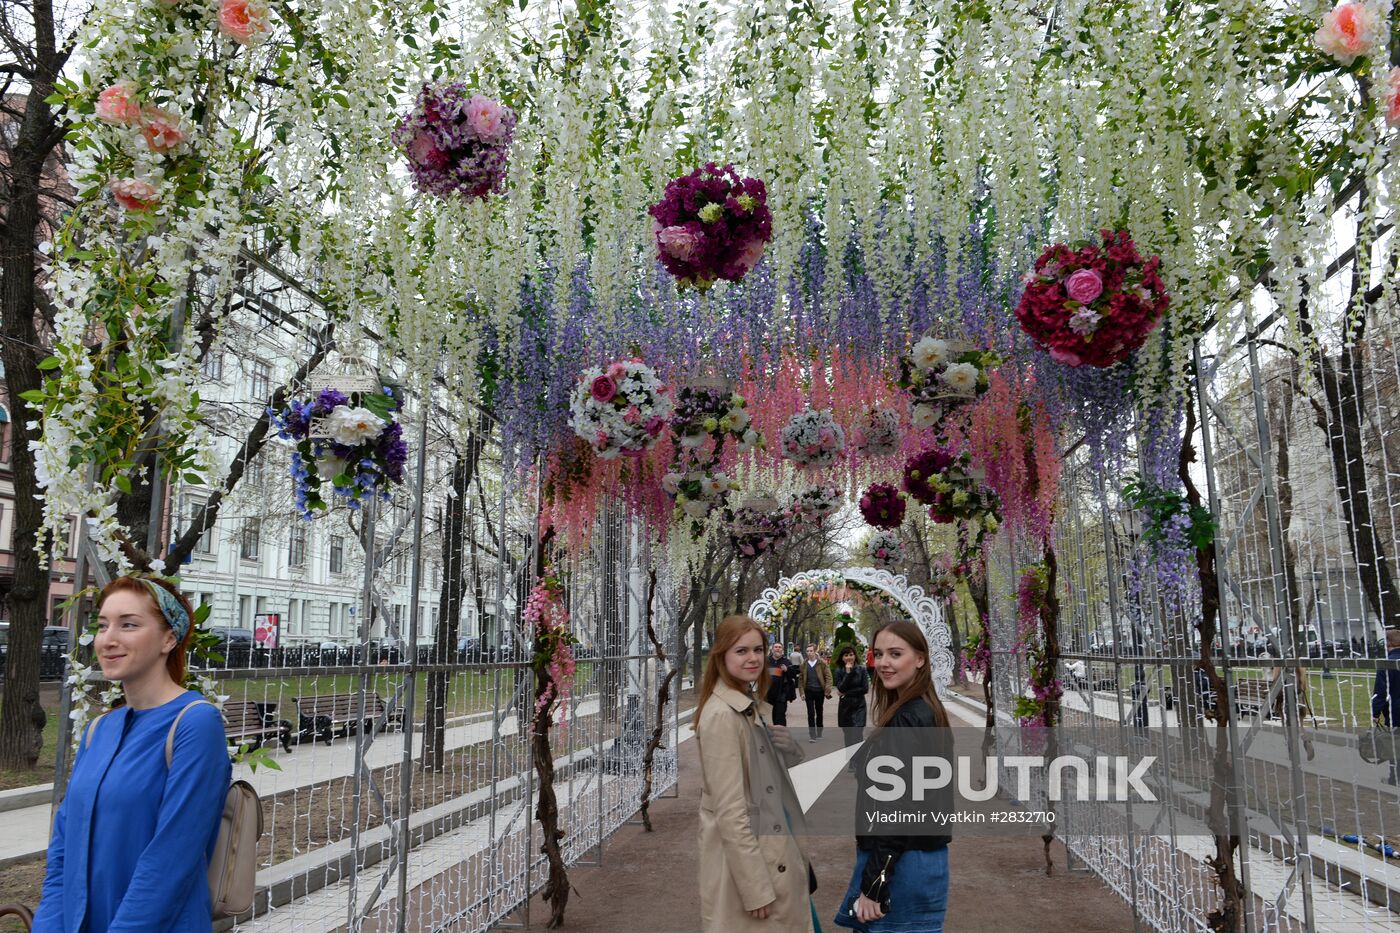 Opening of Moscow Spring Festival